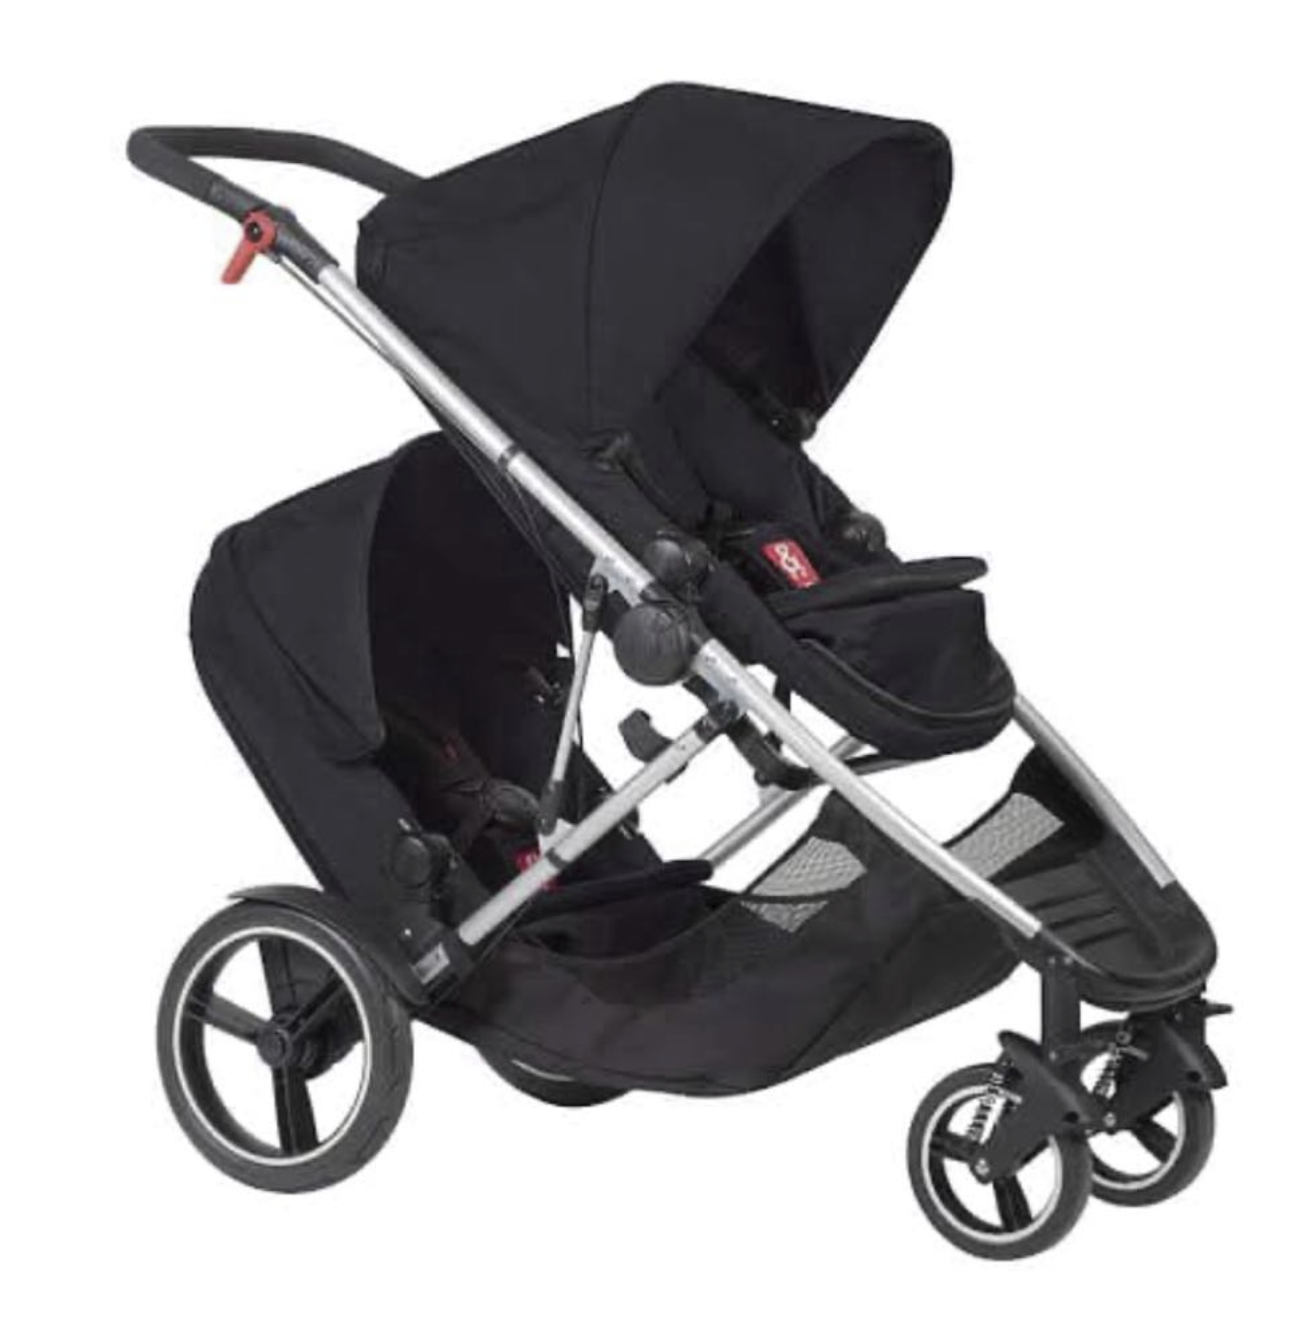 Second-hand Double Stroller